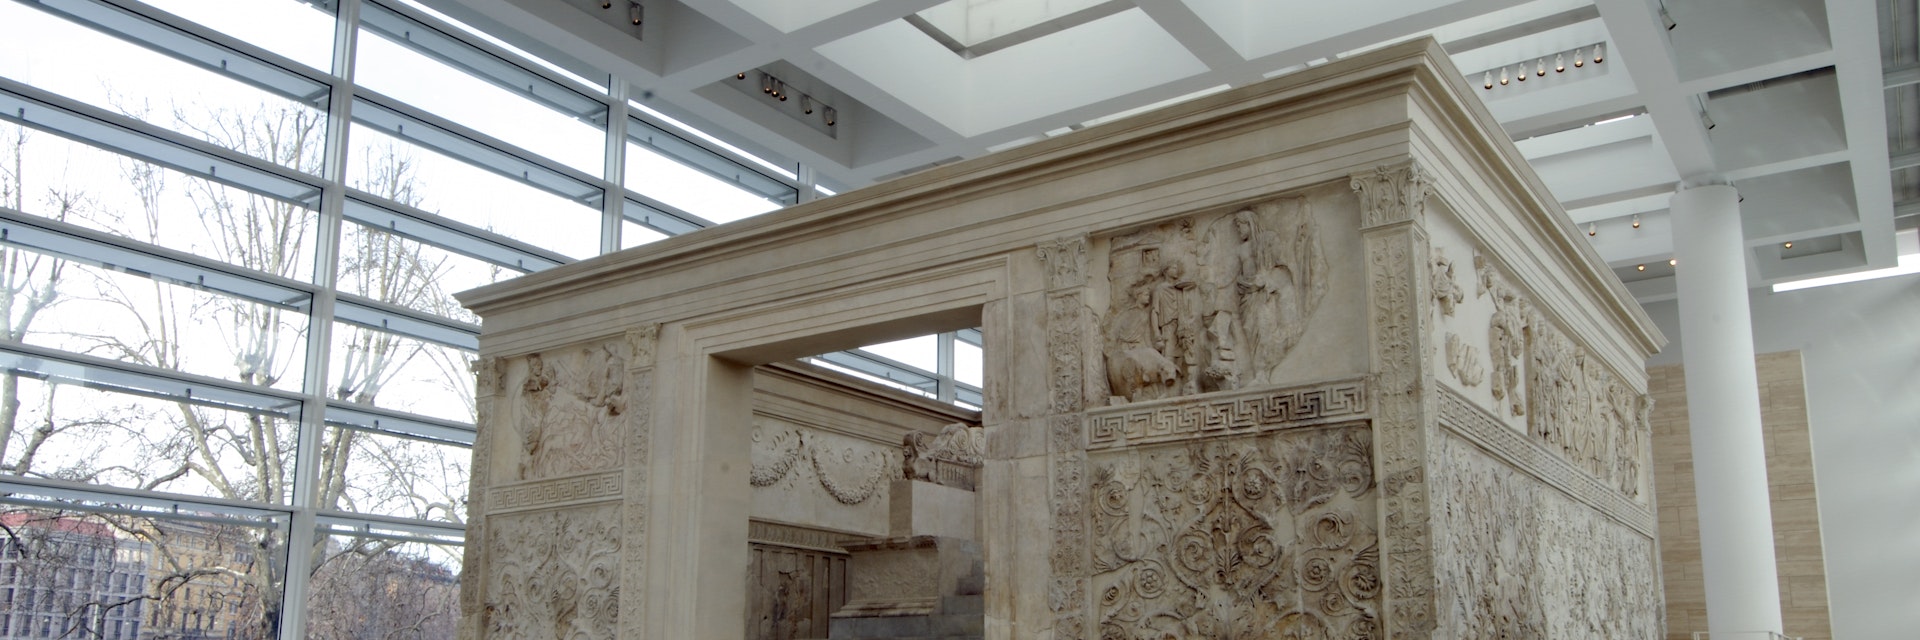 Museo Dell'ara Pacis.